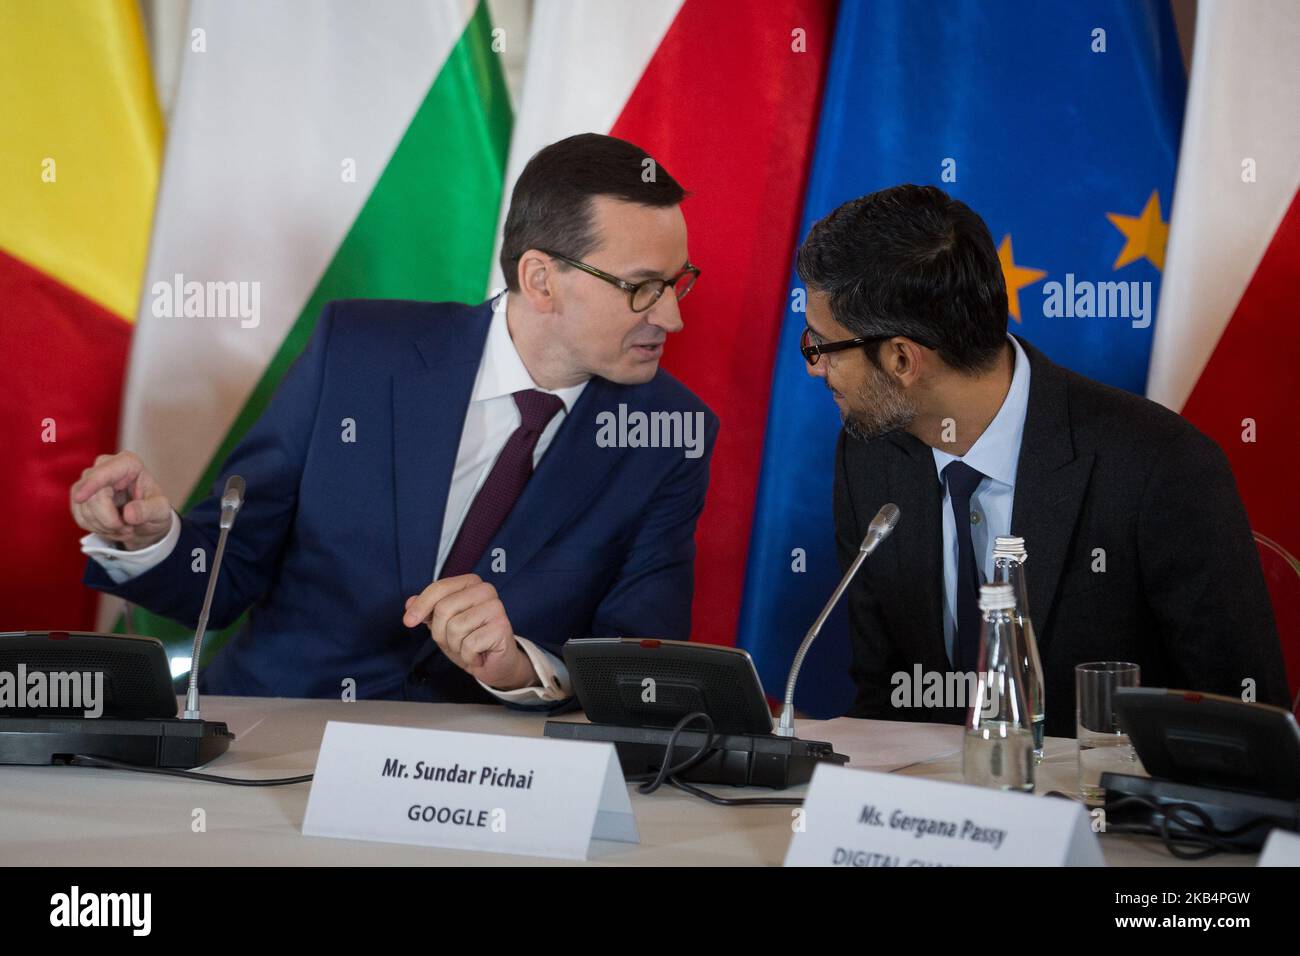 Prime Minister of Poland Mateusz Morawiecki (L) and Google CEO Sundar Pichai (R) during the 'Central and Eastern Europe Innovation Roundtable' at Lazienki Palace in Warsaw, Poland on 21 January 2019 (Photo by Mateusz Wlodarczyk/NurPhoto) Stock Photo